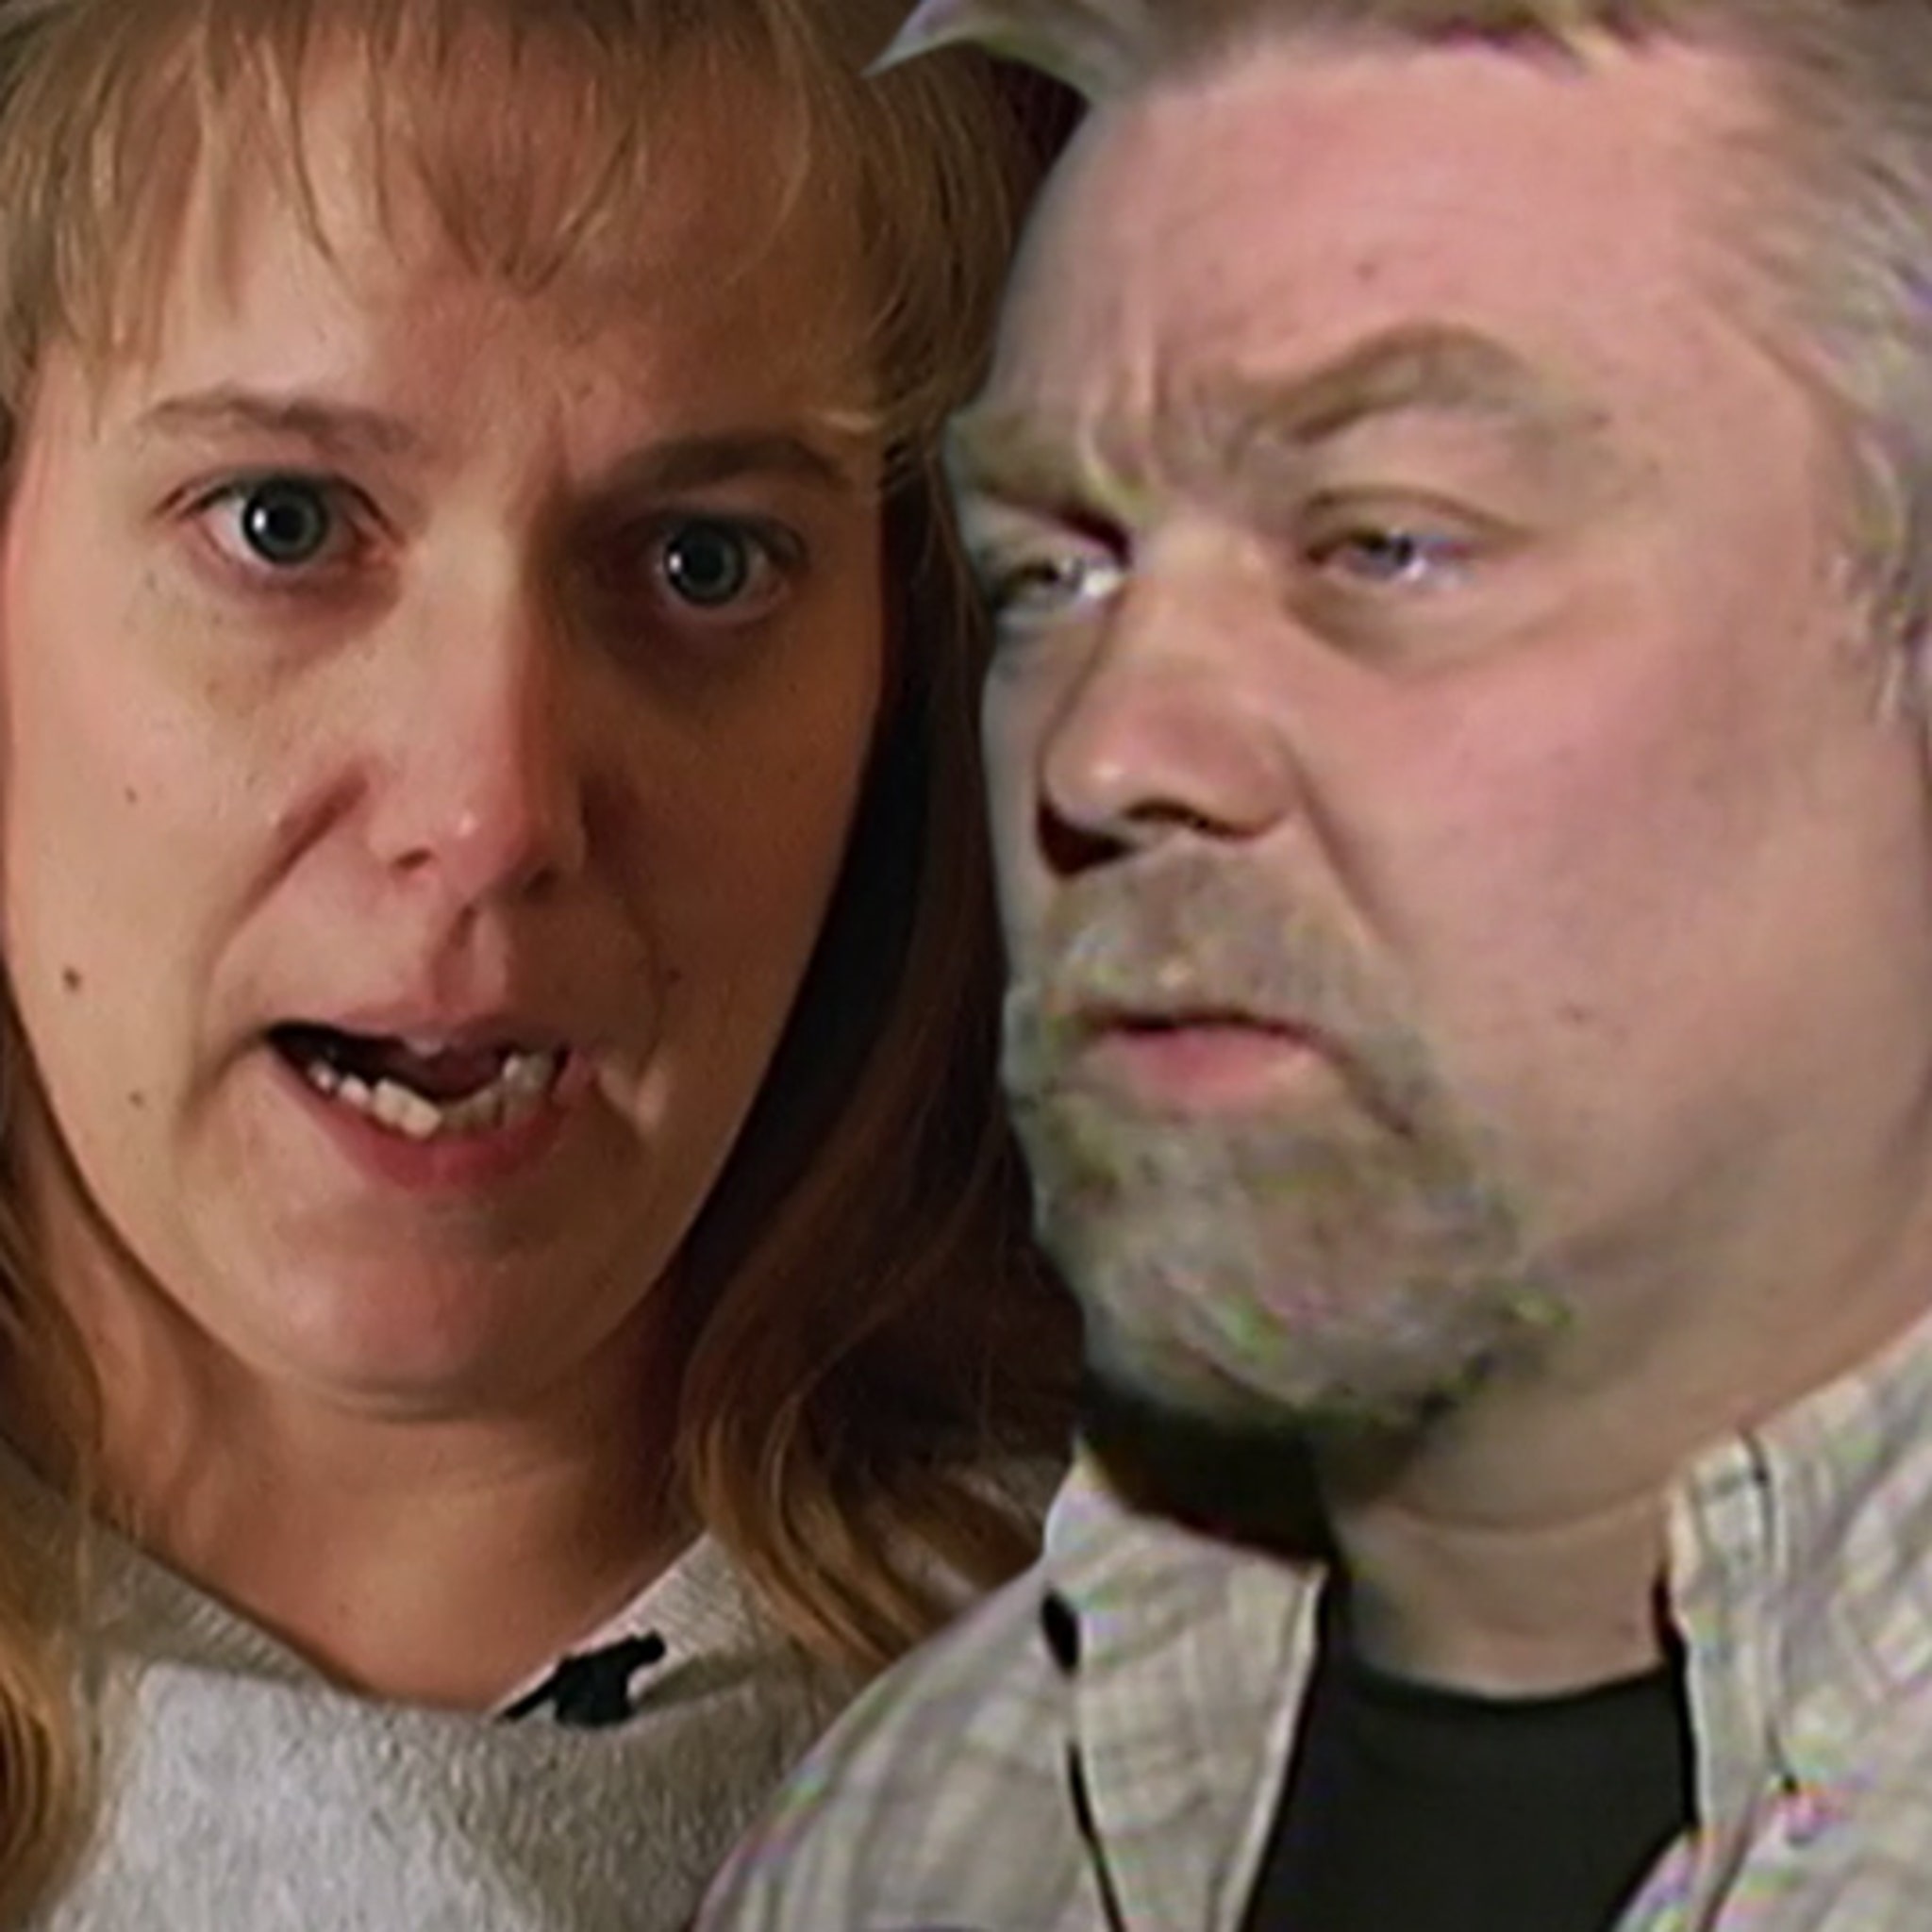 Can we all agree by now that Steven Avery abused Jodi? : r